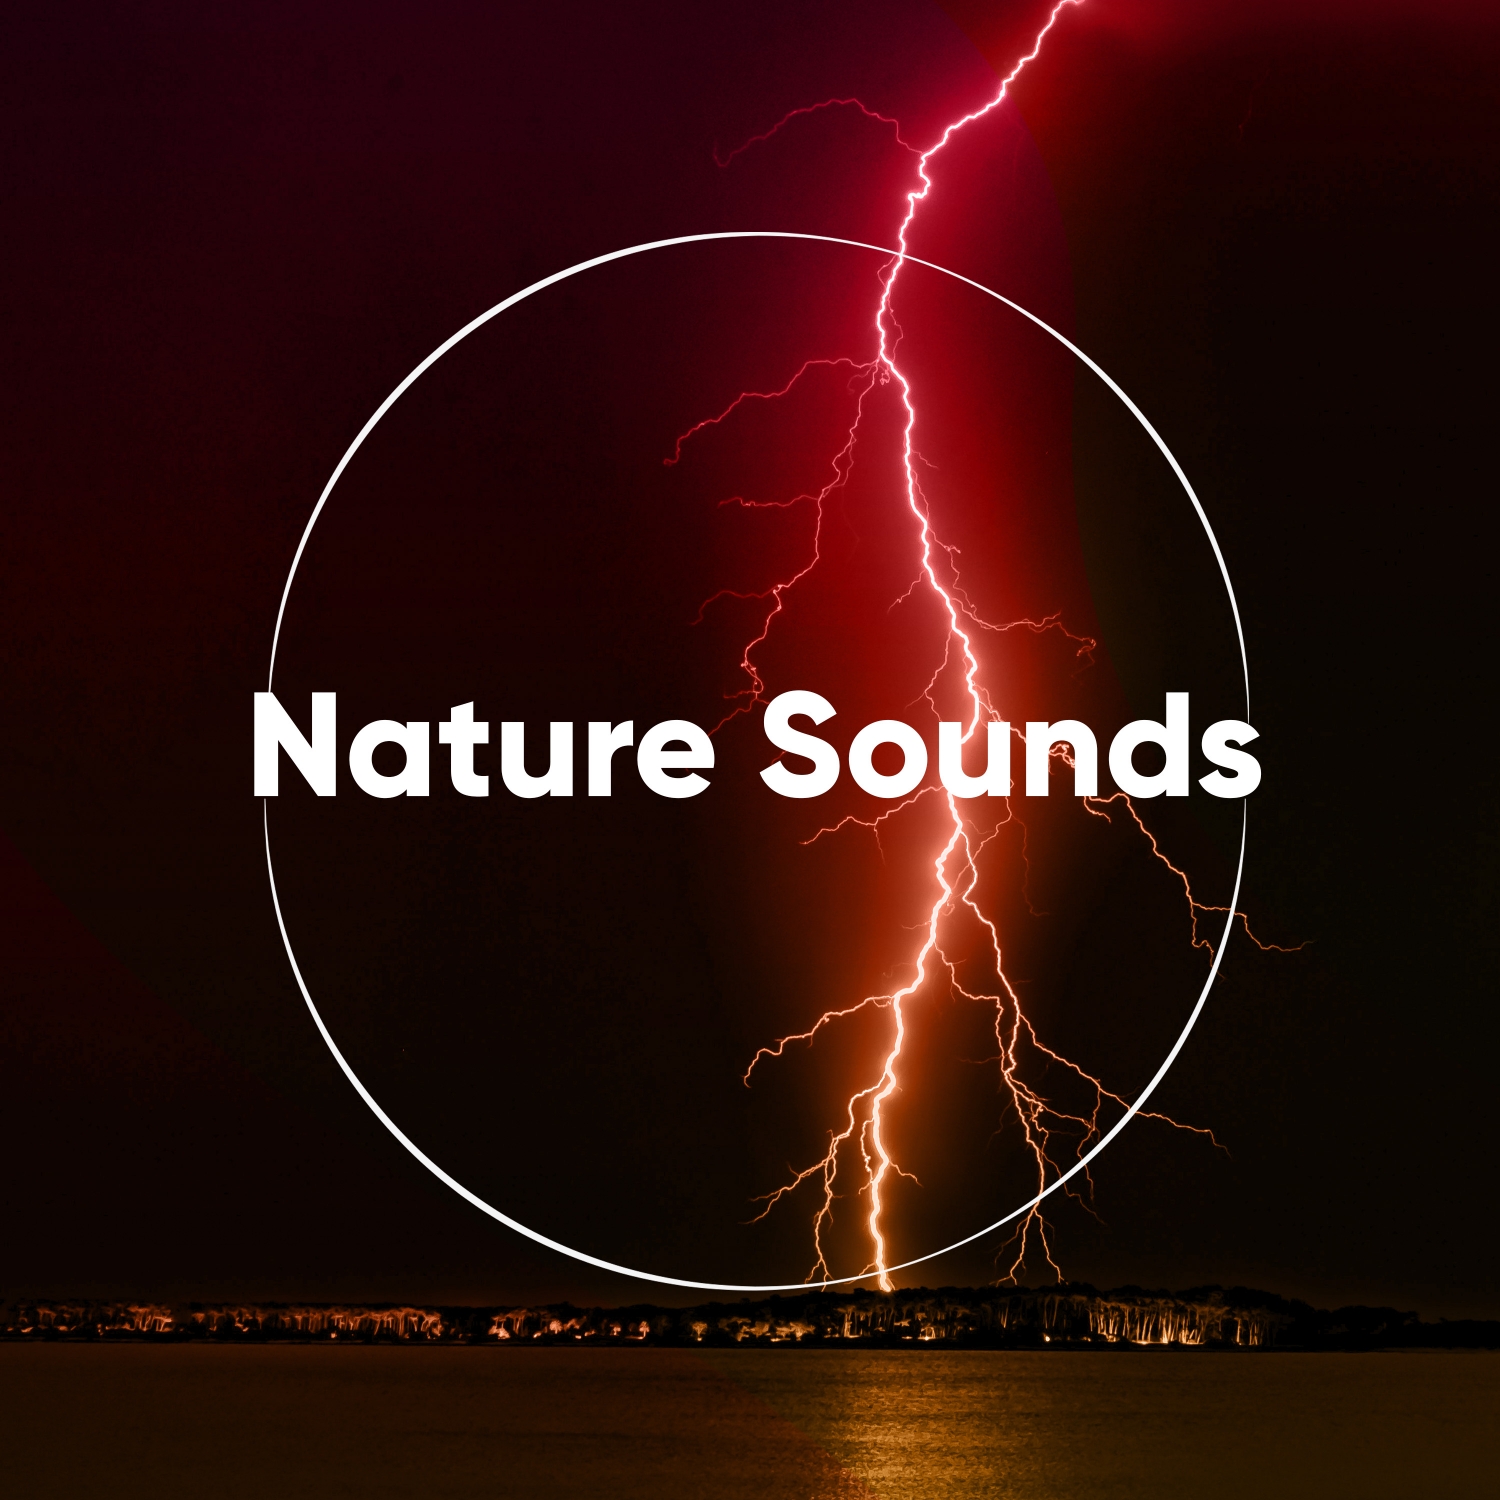 12 Nature Sounds to Improve Mindfulness and Meditate with Nature